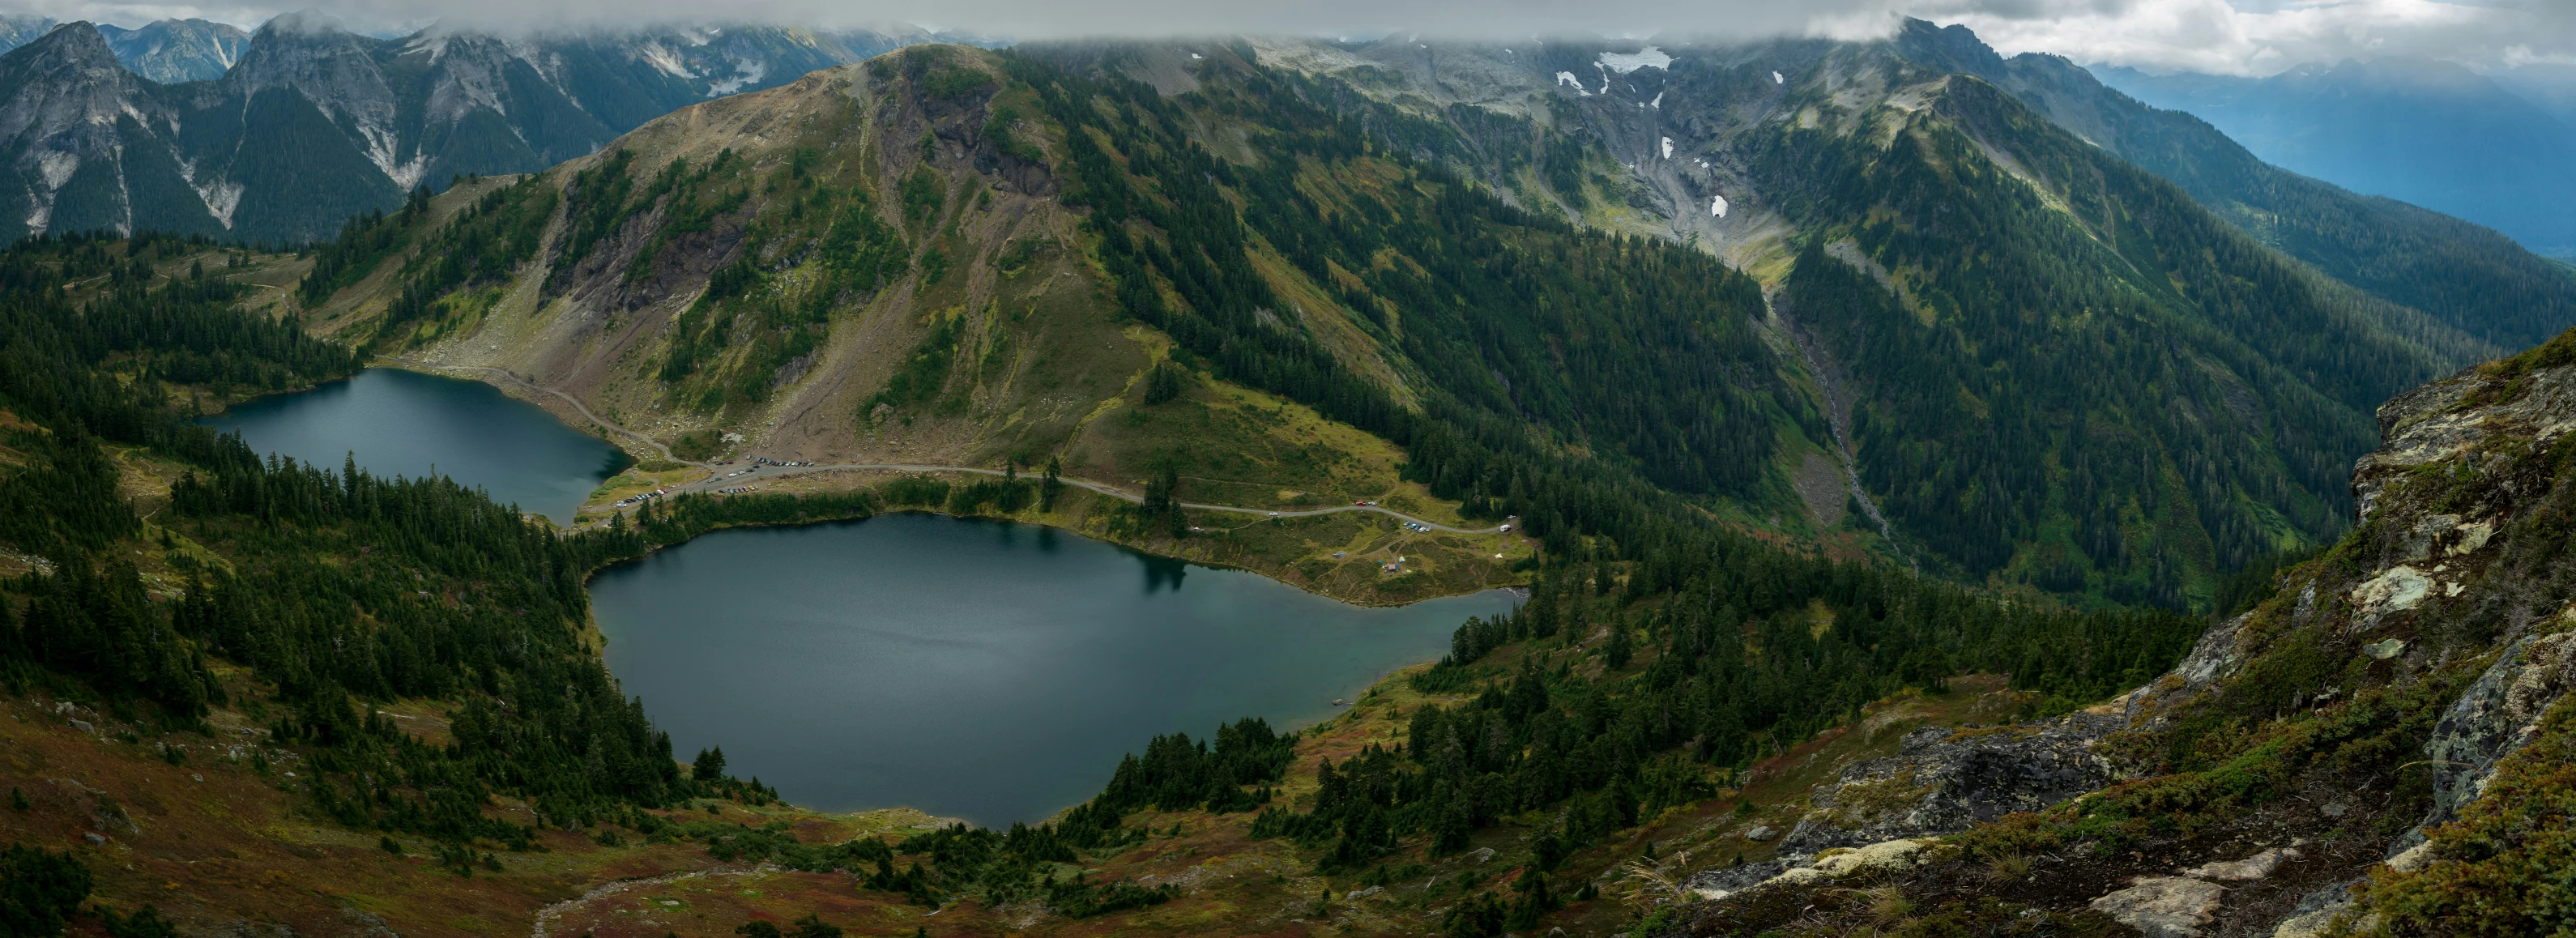 mountains surround a blue lake surrounded by greenery